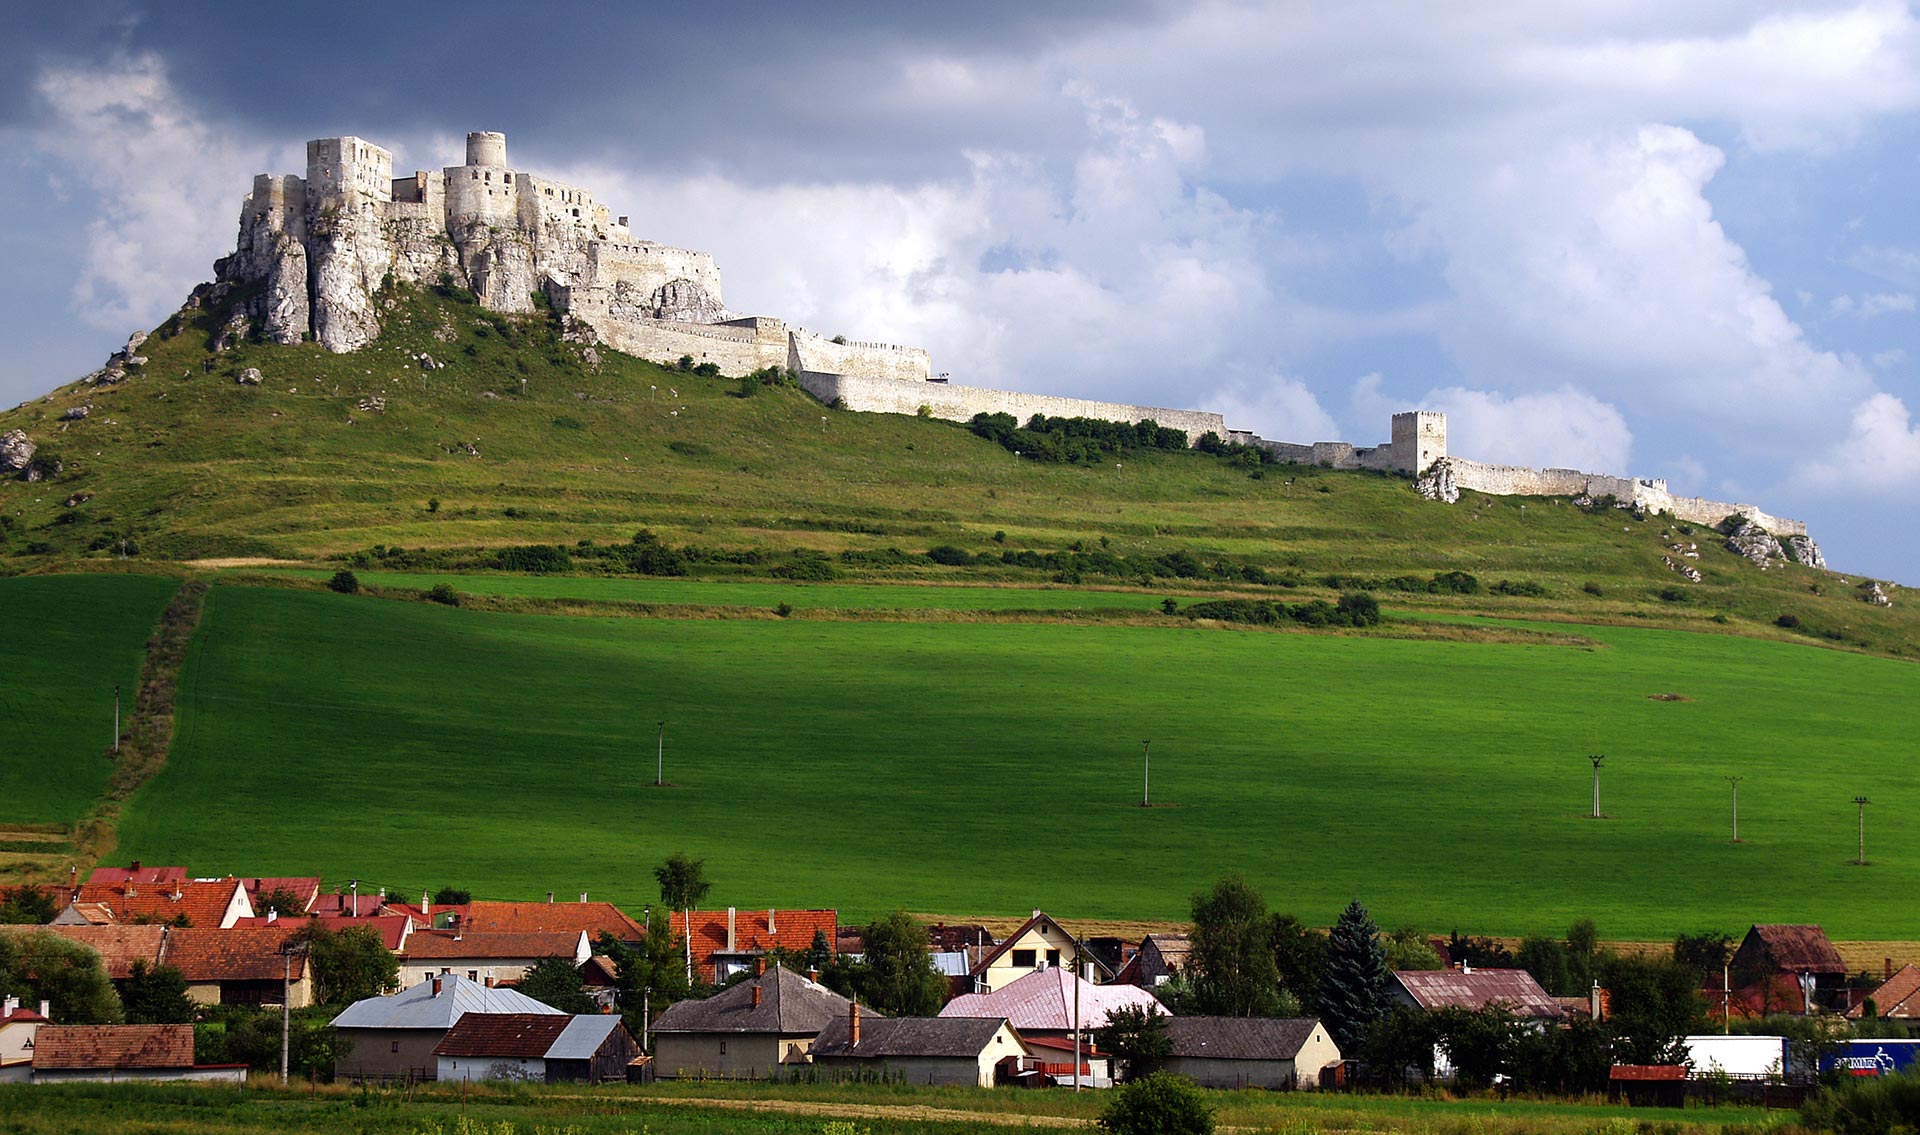 General 1920x1135 architecture building house Slovakia hills castle village field grass ancient clouds ruins trees